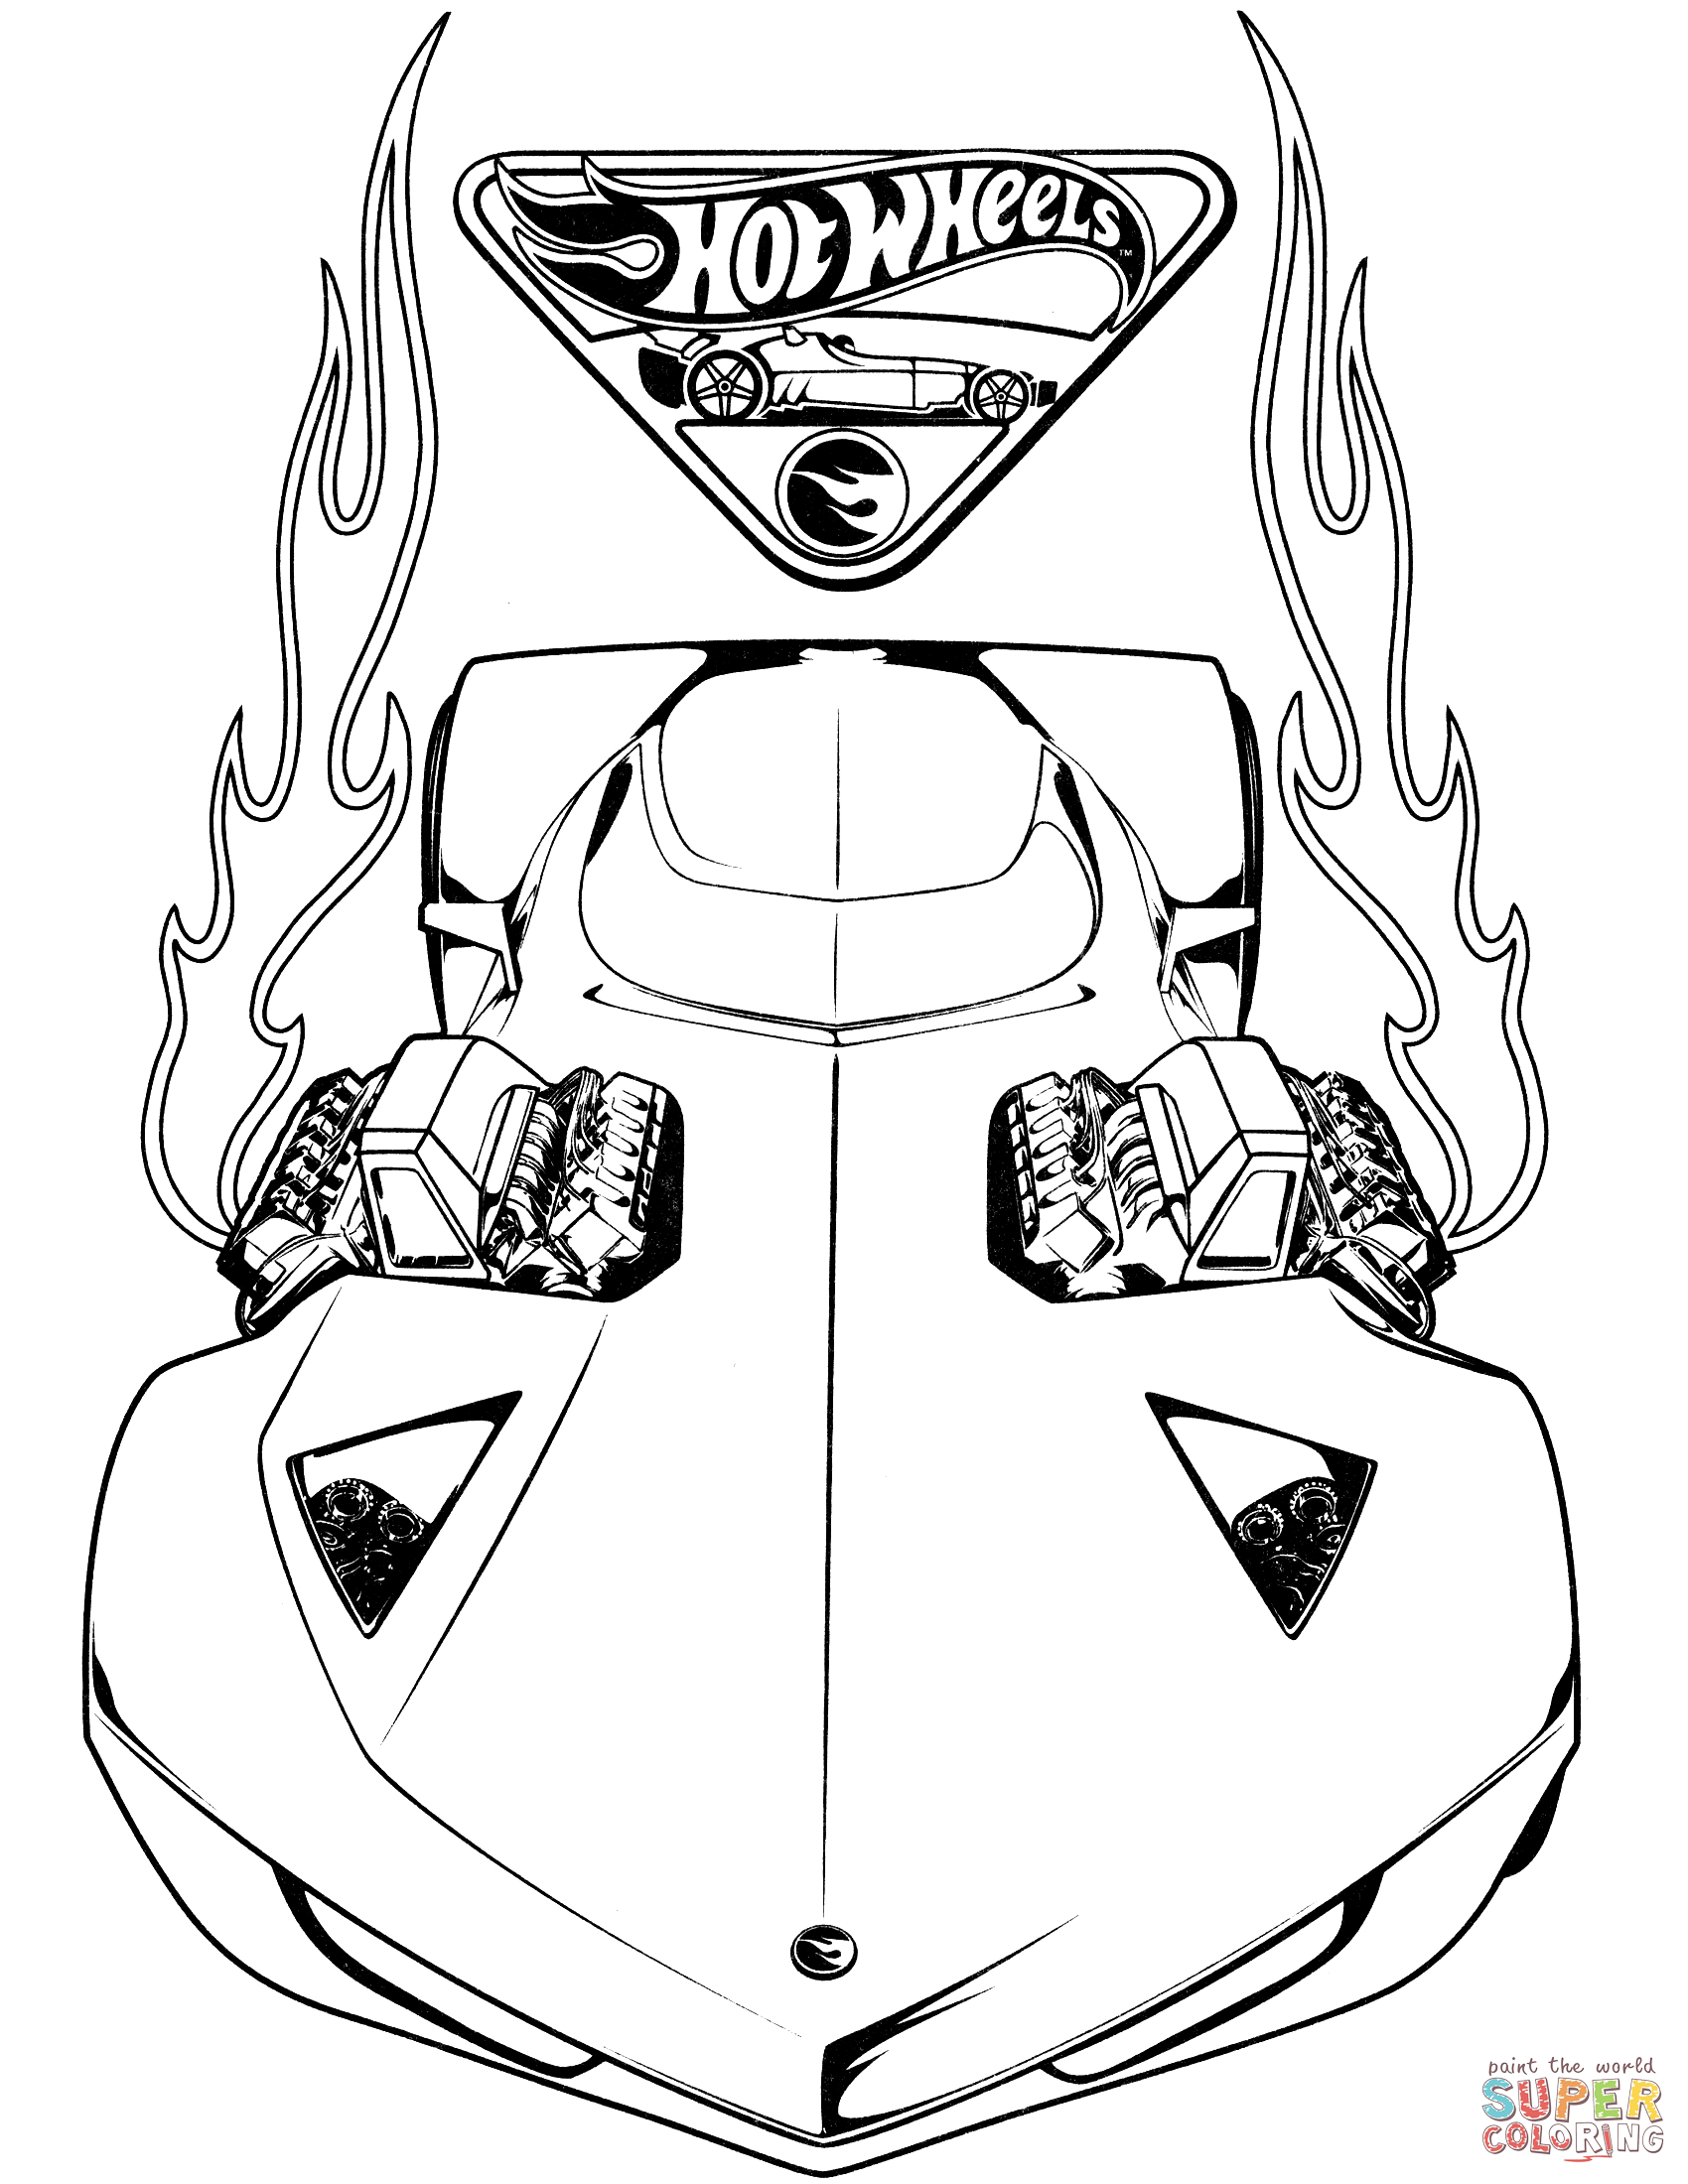 Hot Wheels Acceleracers coloring page | Free Printable Coloring Pages